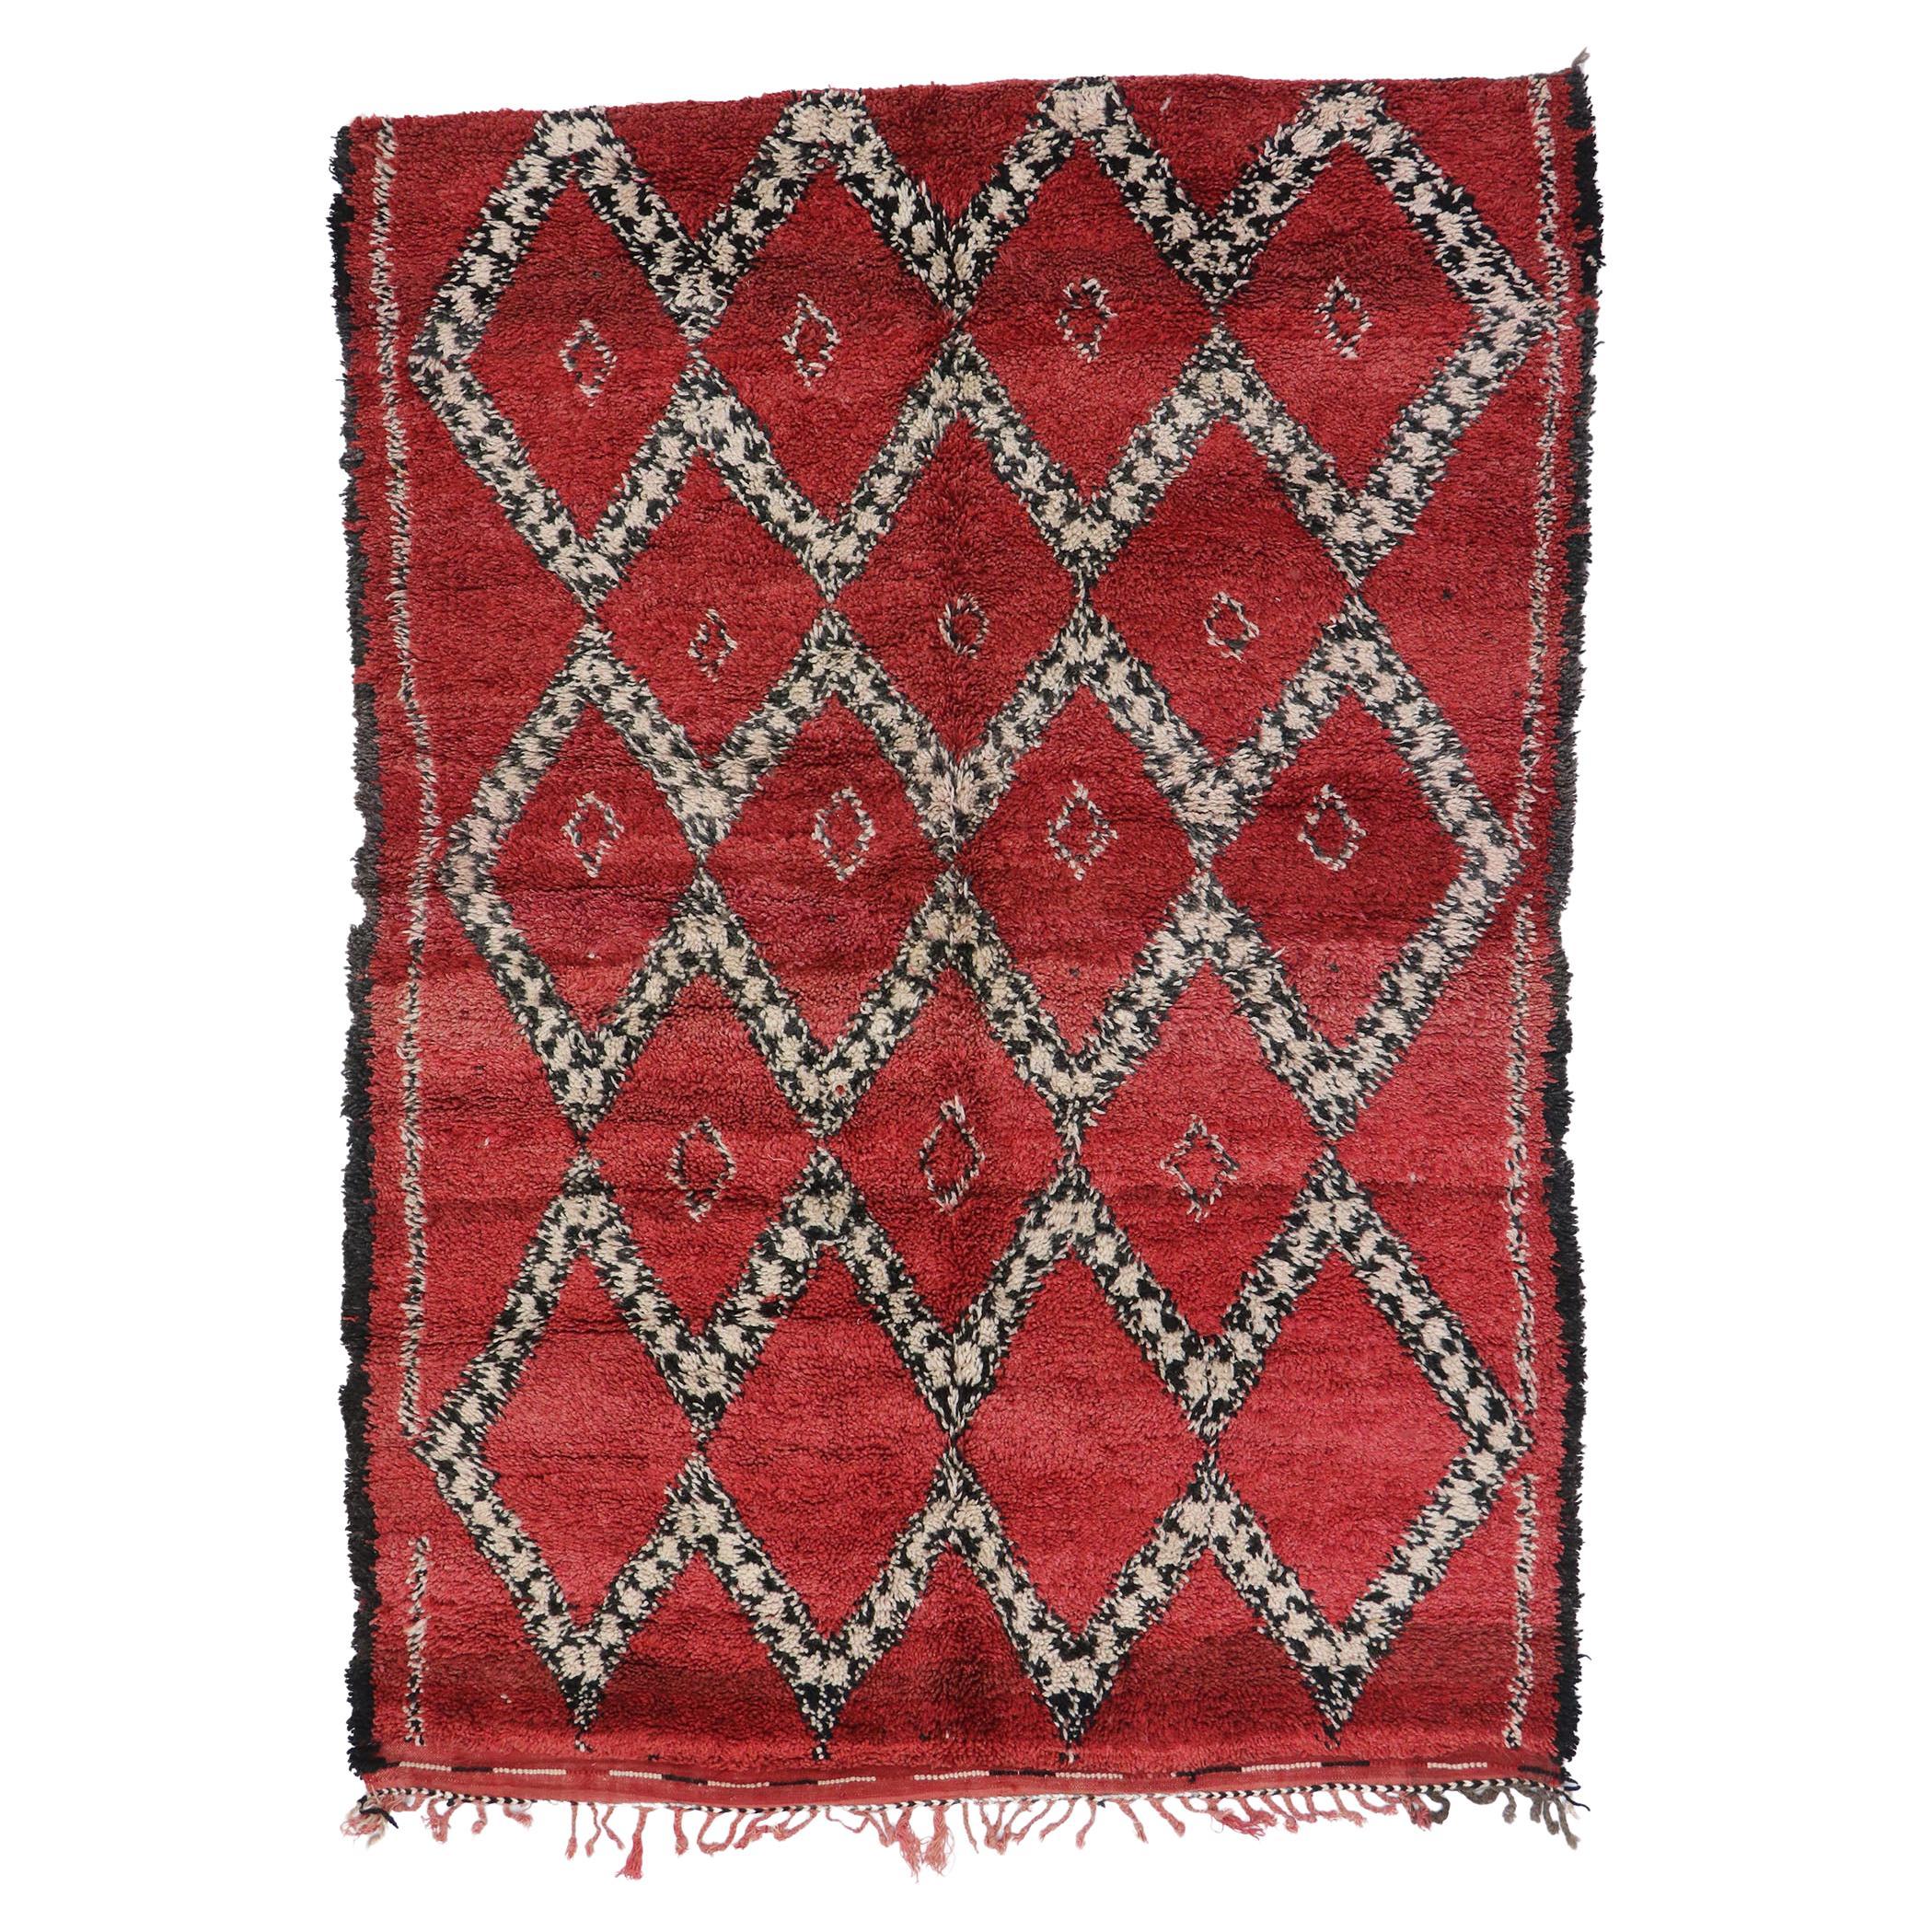 Vintage Moroccan Beni Ourain Rug, Midcentury Meets Boho Chic For Sale